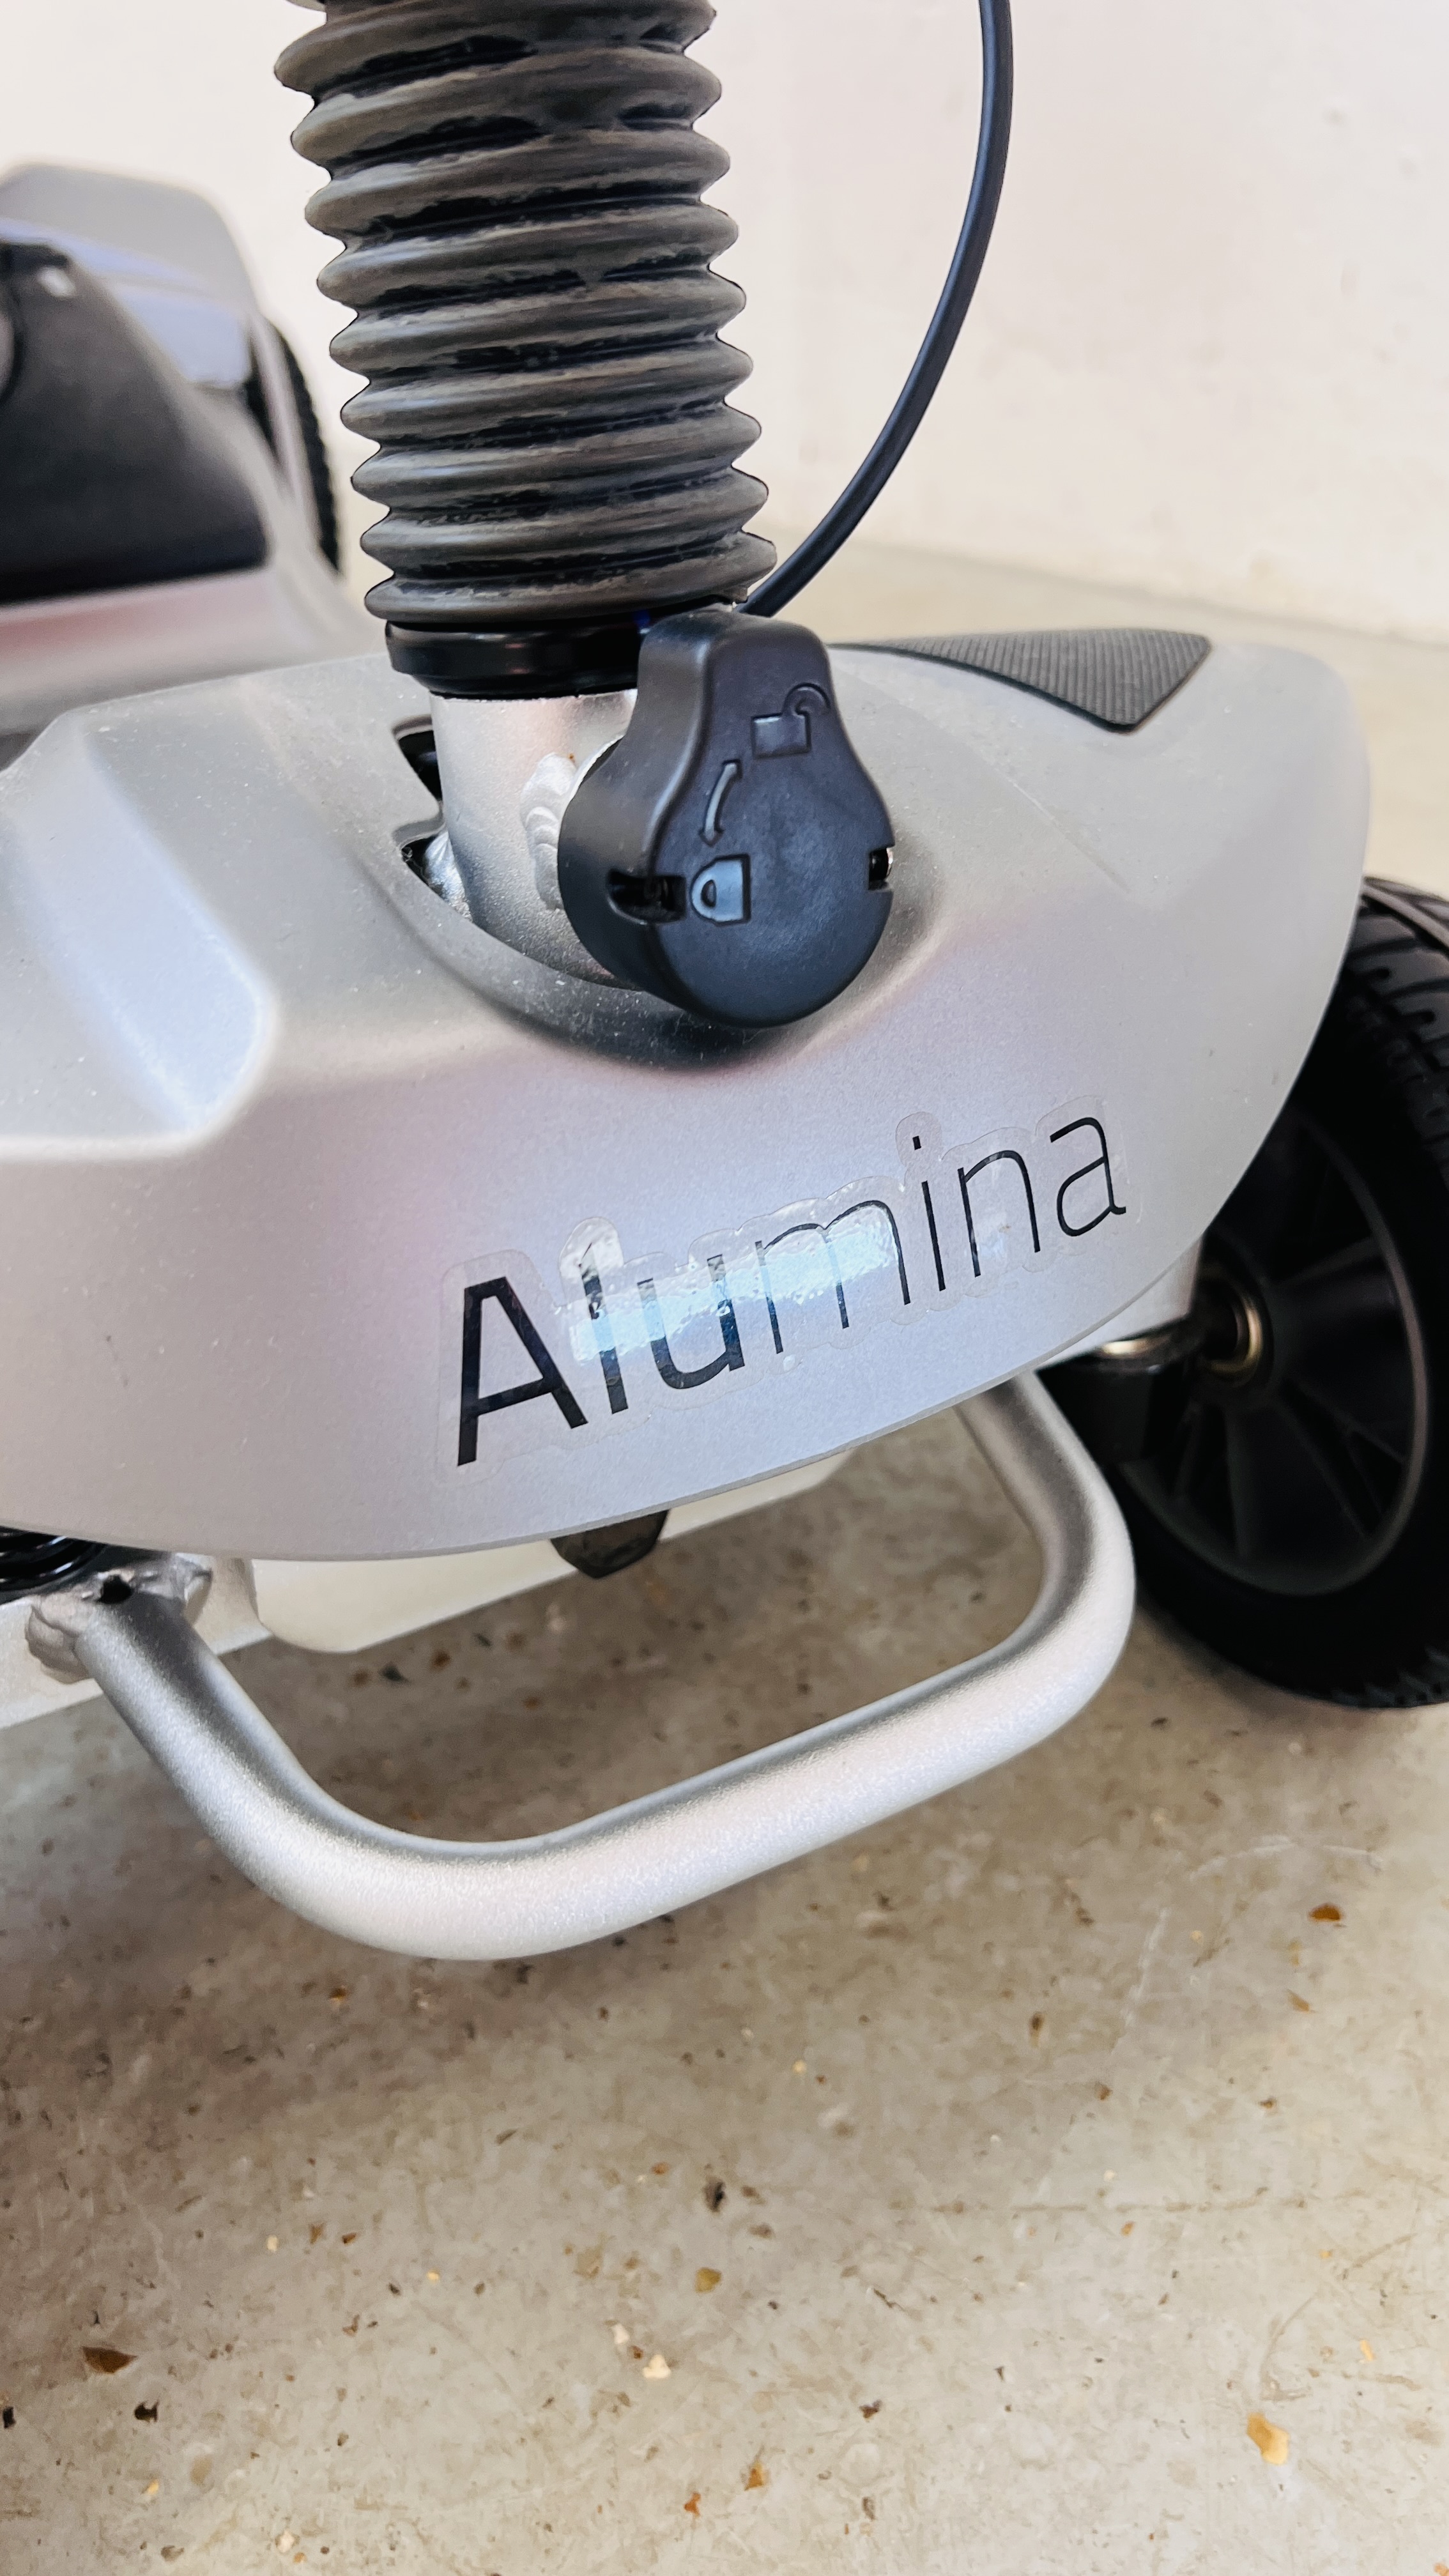 A MOTION ALUMINA COMPACT FOLDING MOBILITY SCOOTER, BACK CARRIER CHARGER, - Image 6 of 22